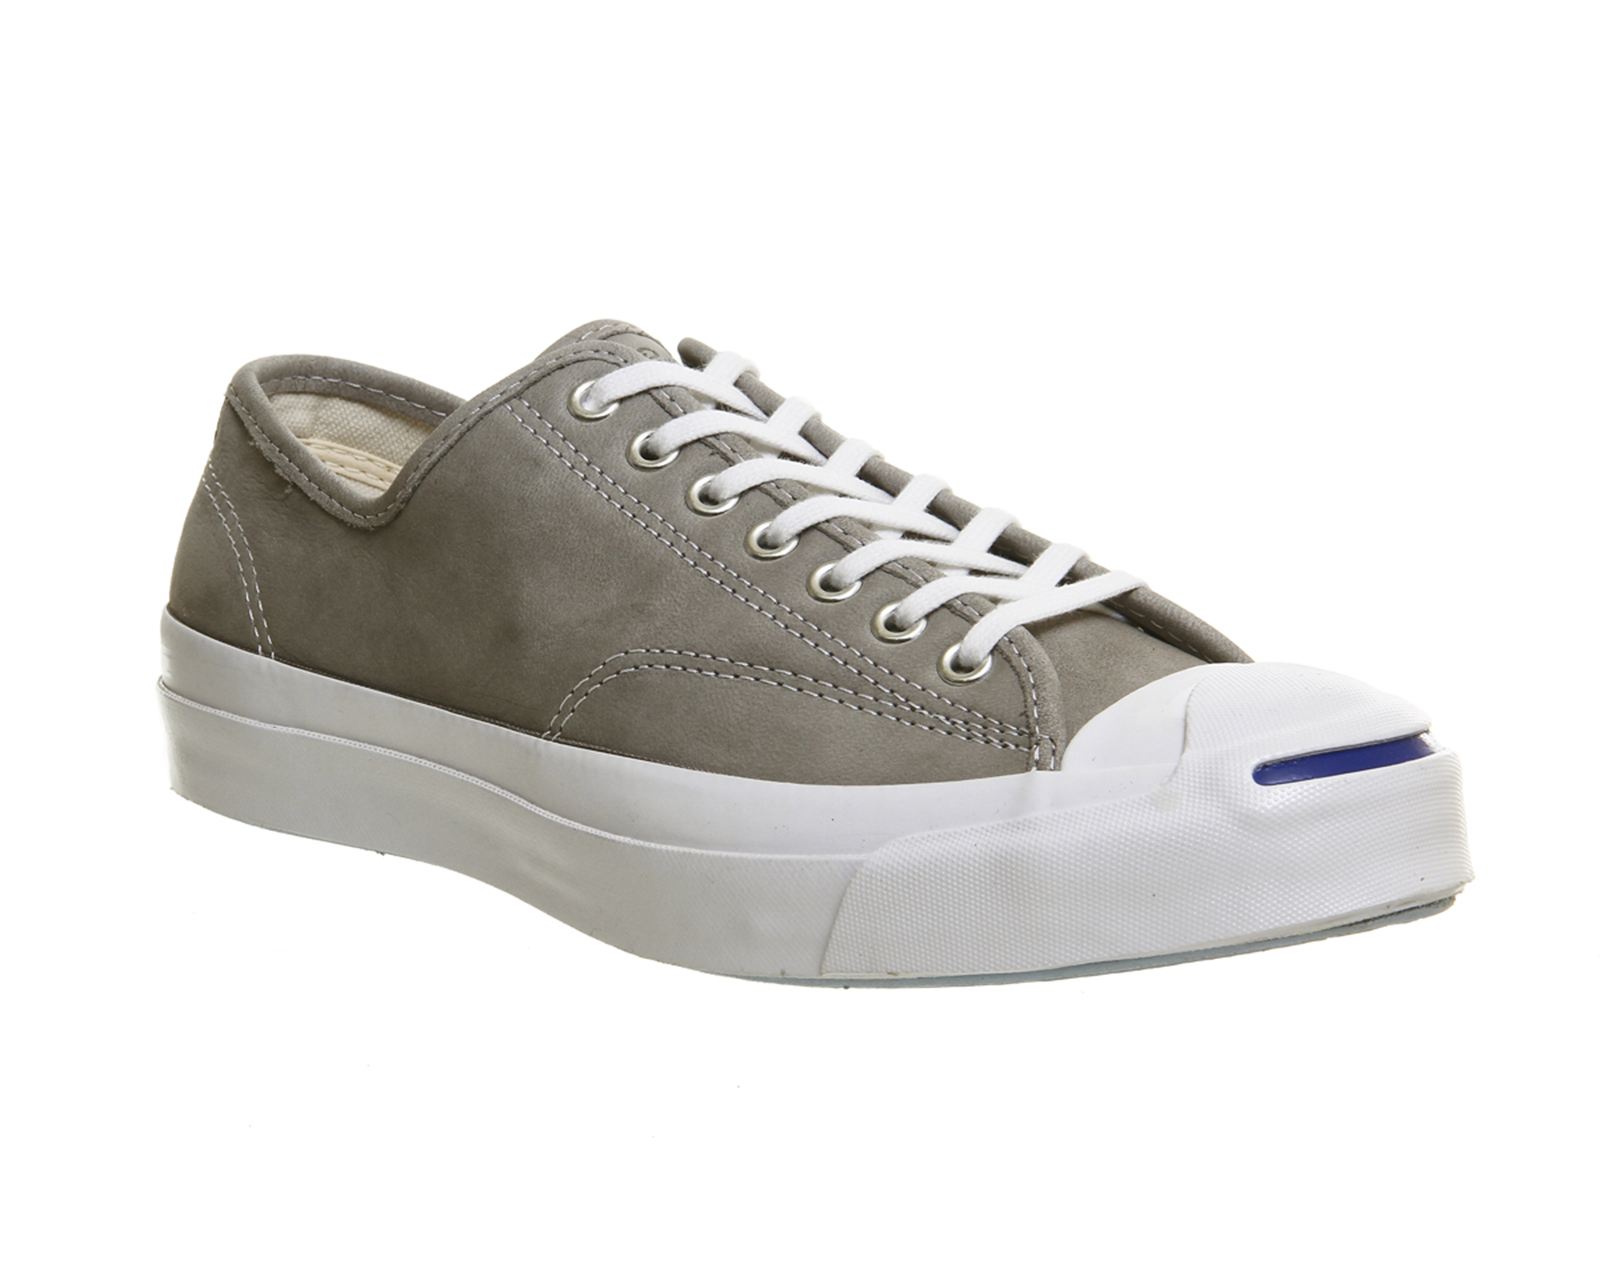 Converse Jack PurcellJack Purcell Signature TrainersDolphin Grey Leather